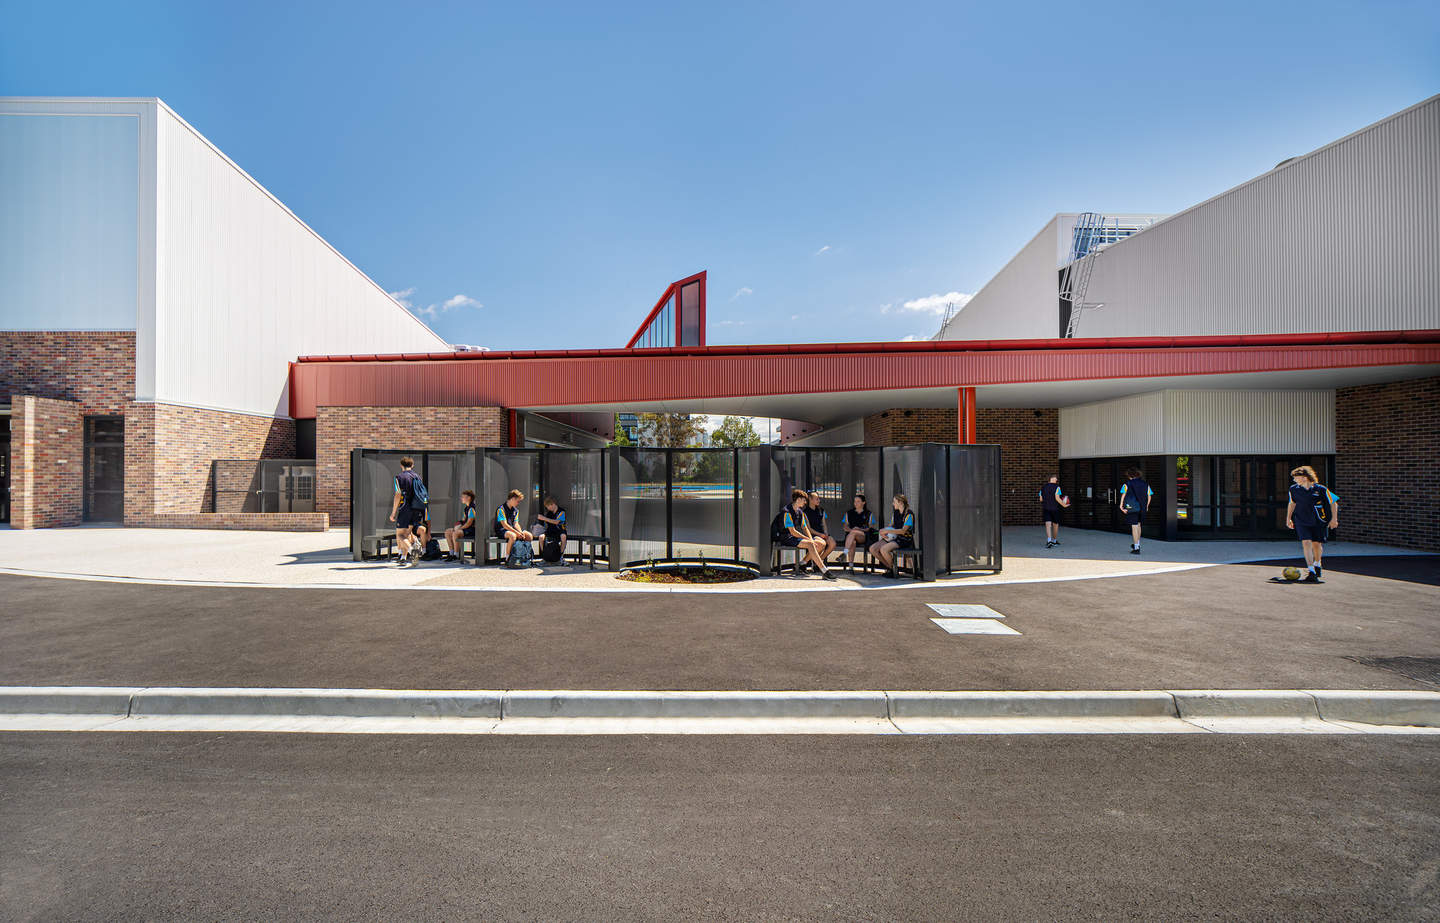 Entrance of new netball centre with kids on benches.